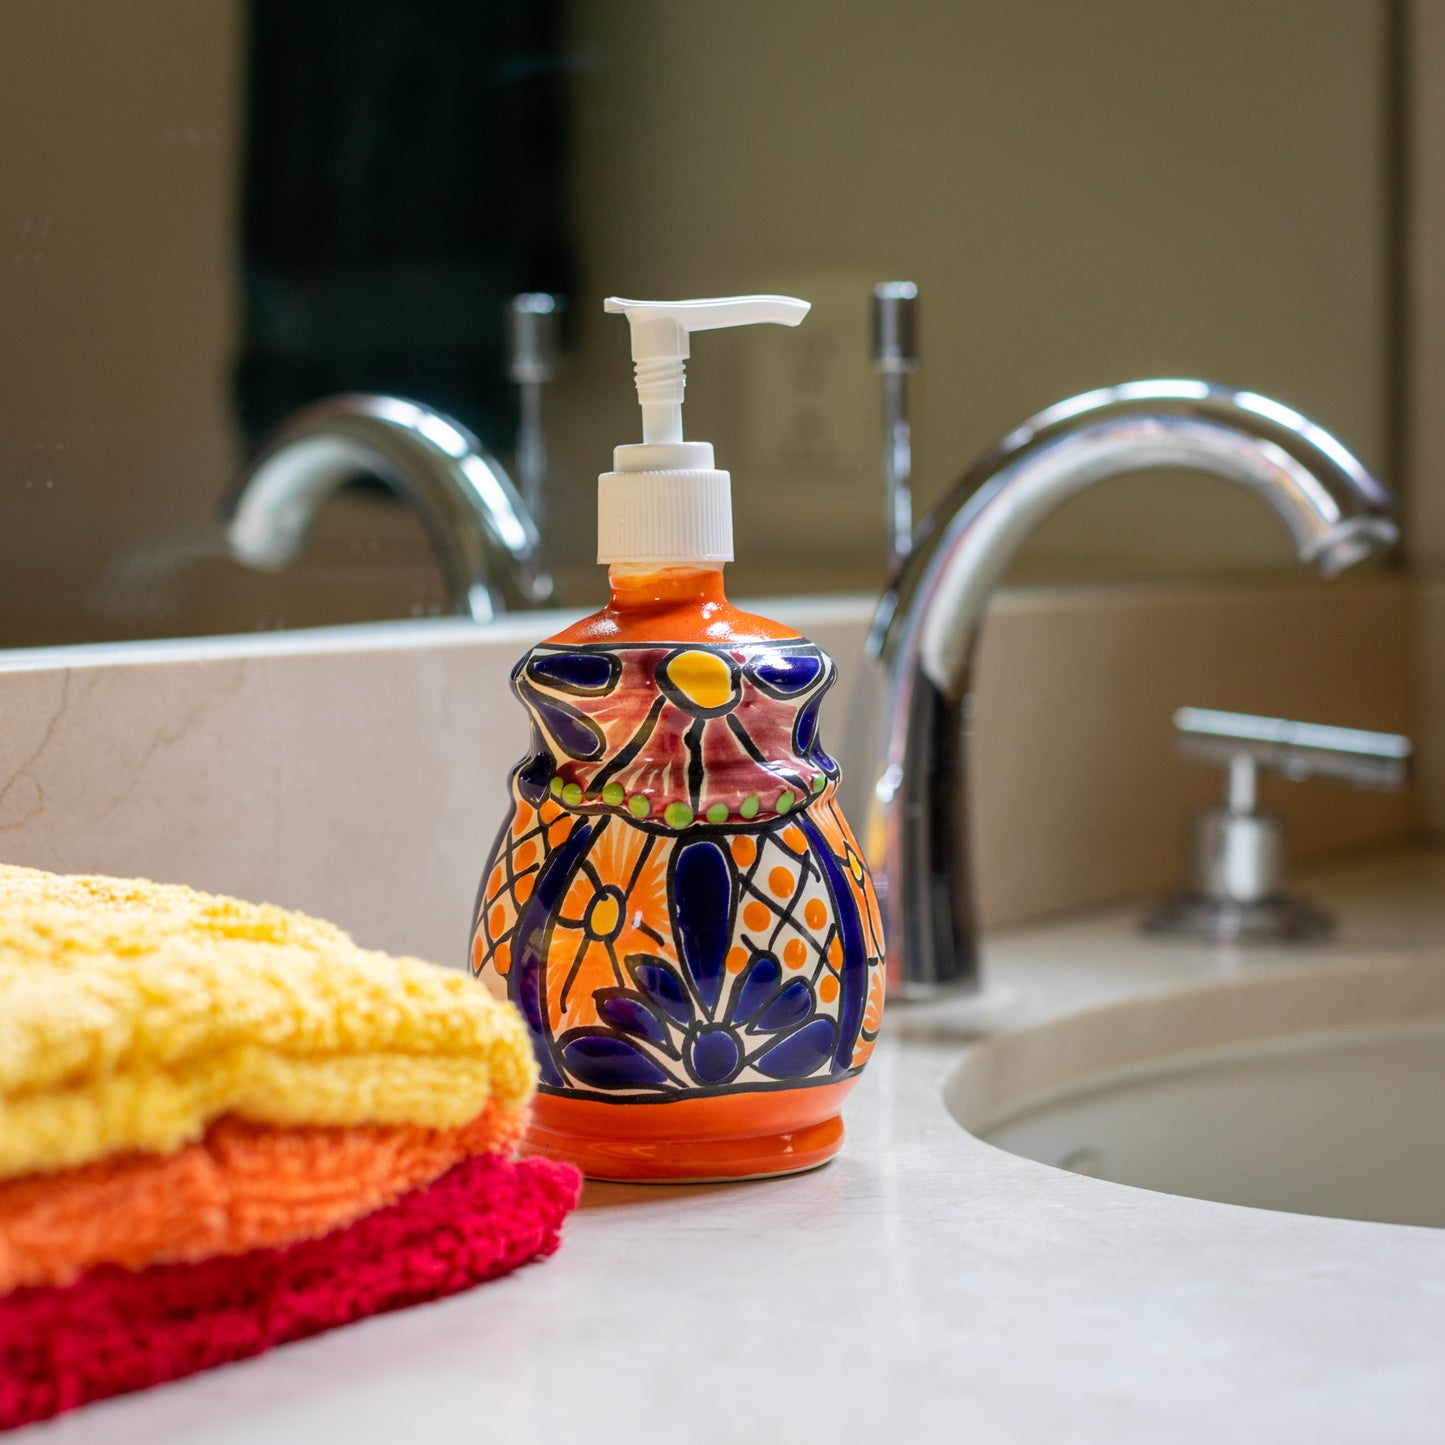 A multicolored, bell design, hand-painted Talavera ceramic soap dispenser sourced from skilled Mexican artisans. on the bathroom sink